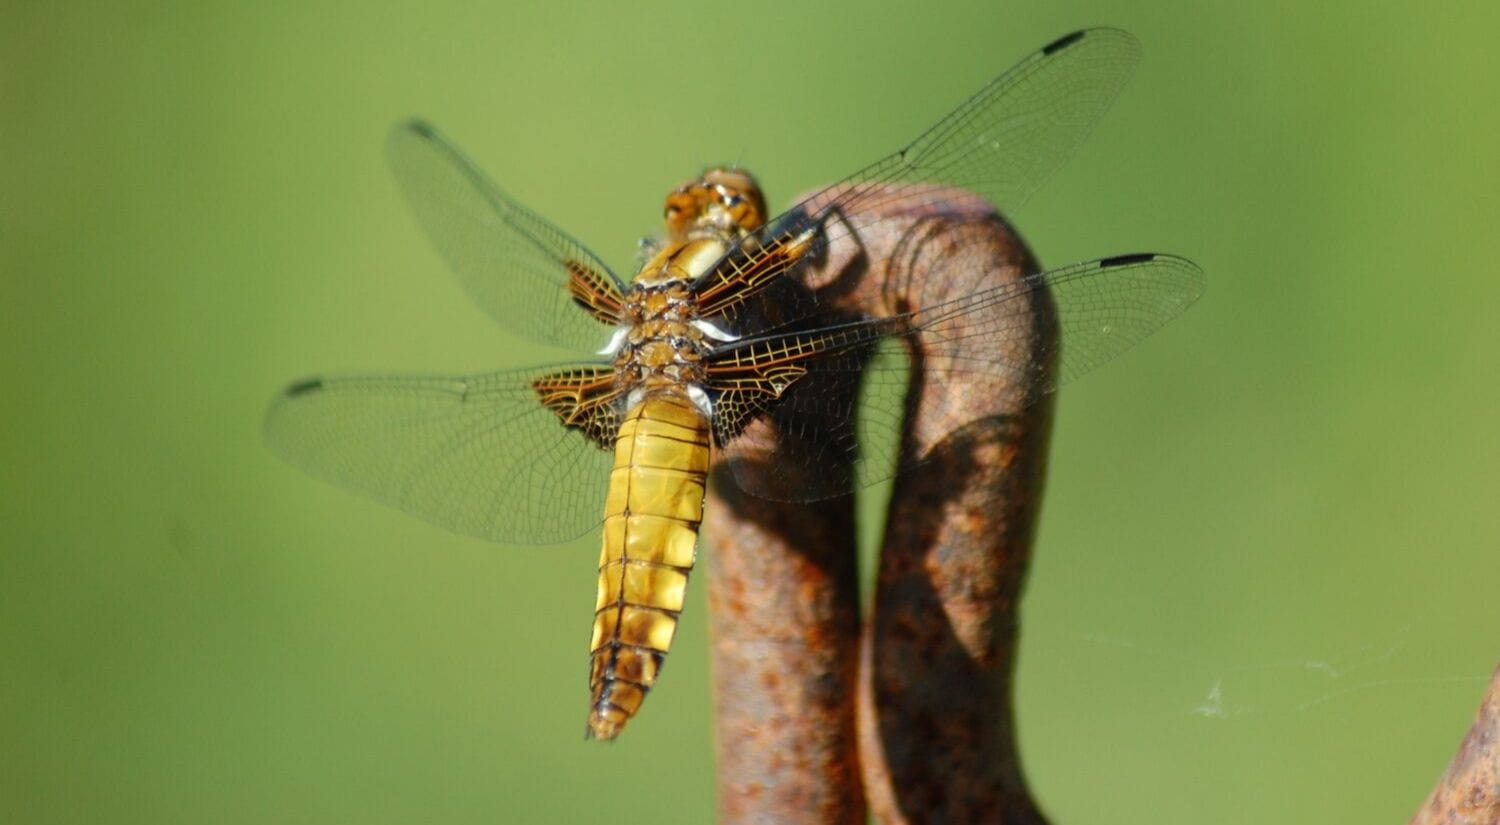 A photo of a dragonfly